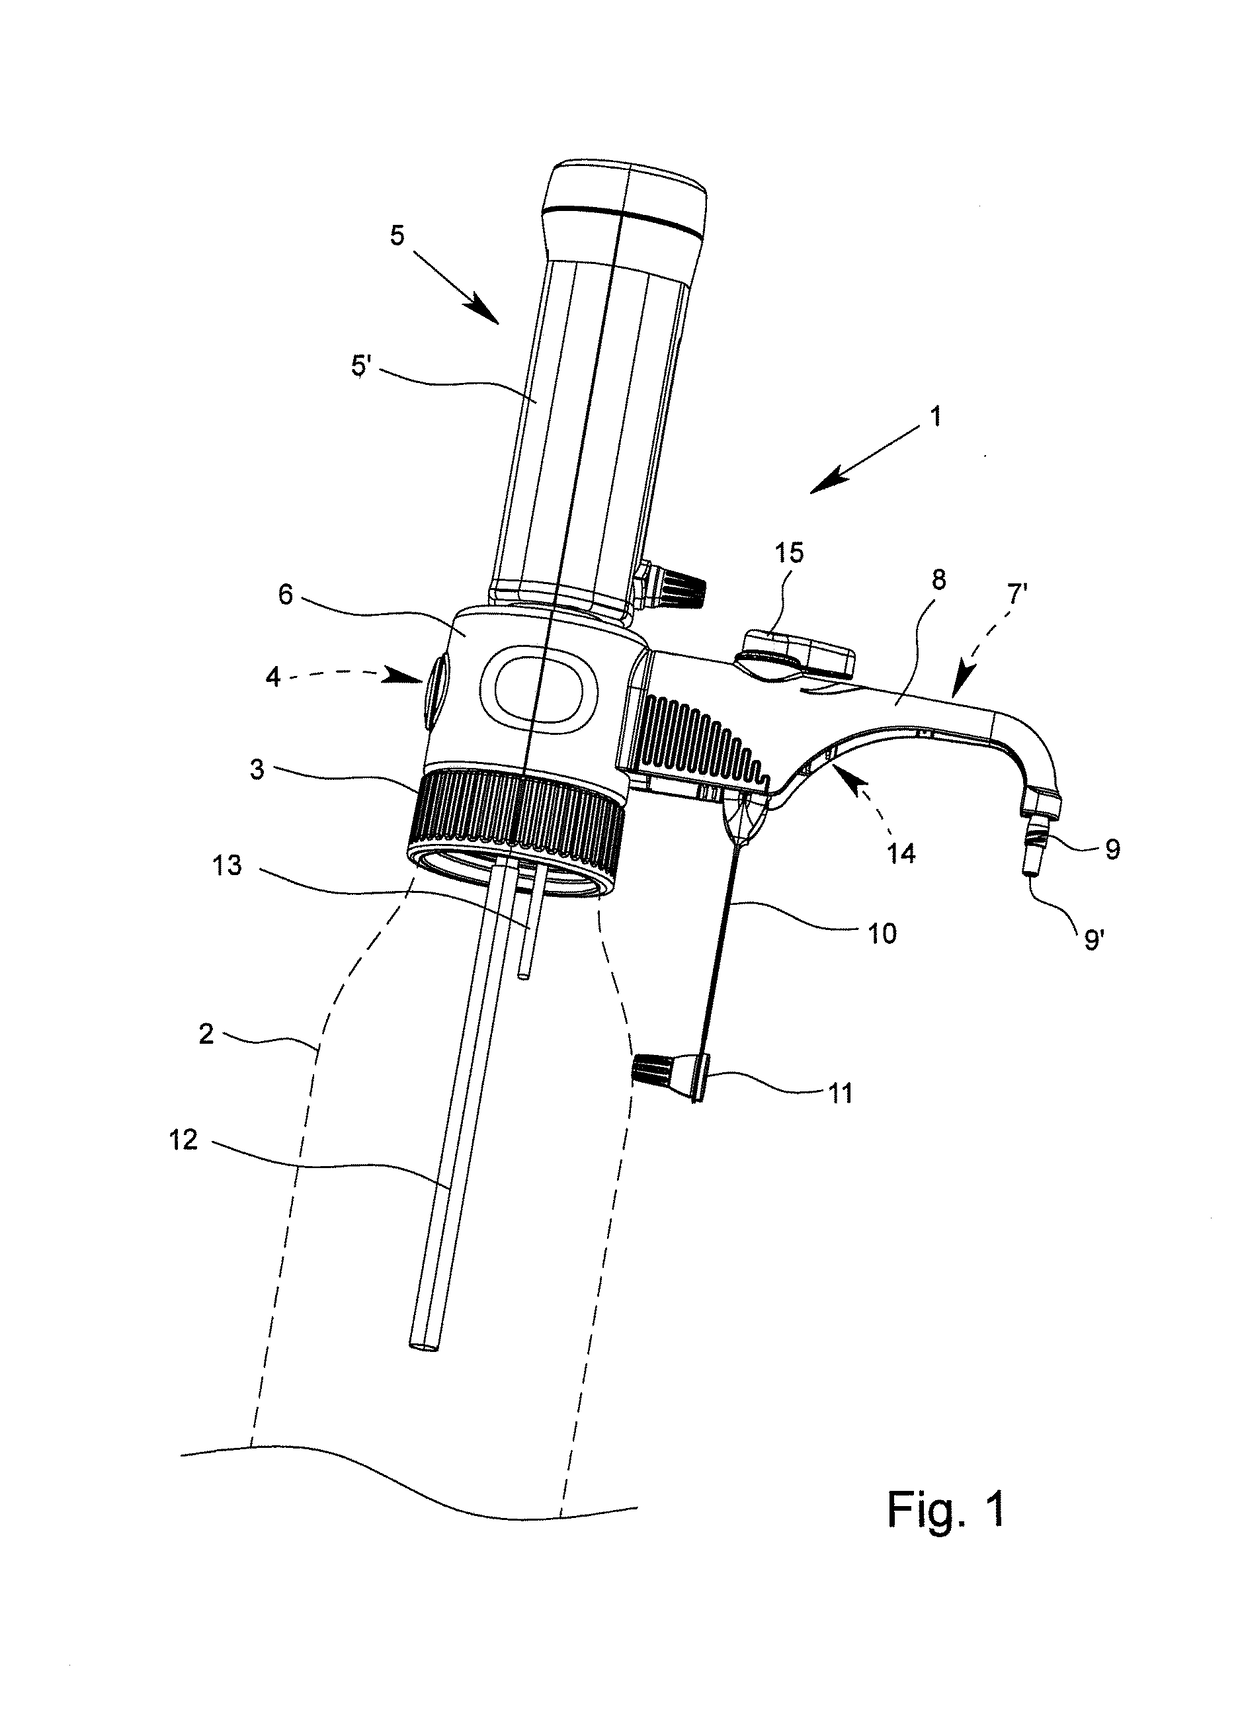 Exhaust line assembly for a bottle attachment apparatus